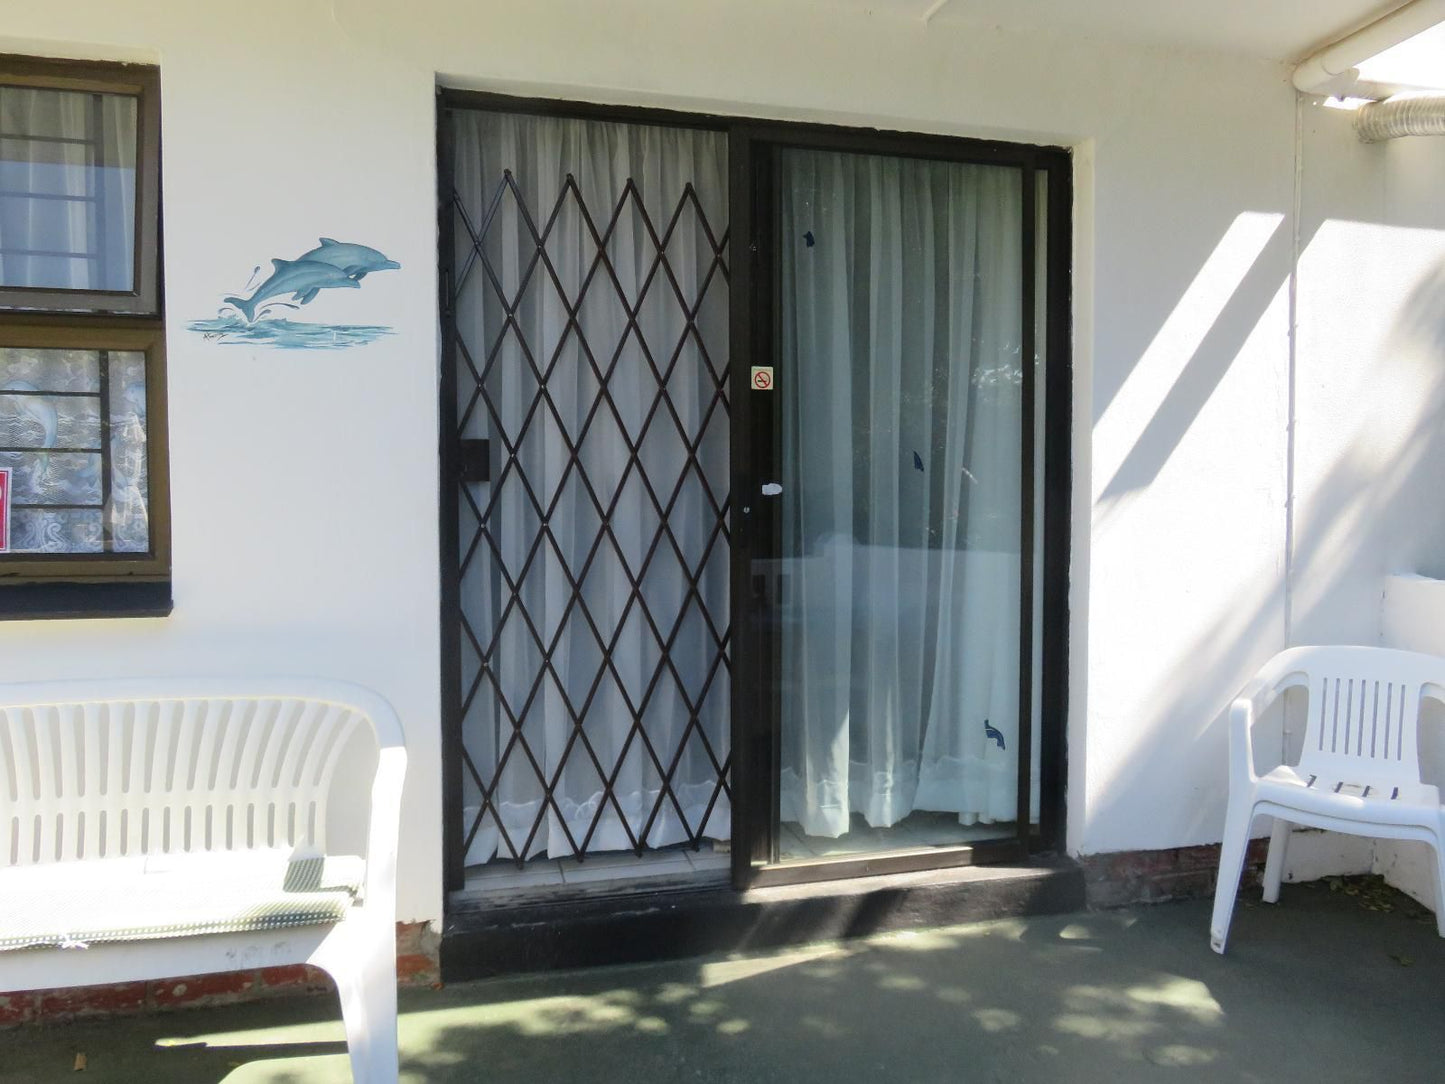 40 Winks Accommodation Somerset West Western Cape South Africa Unsaturated, Door, Architecture